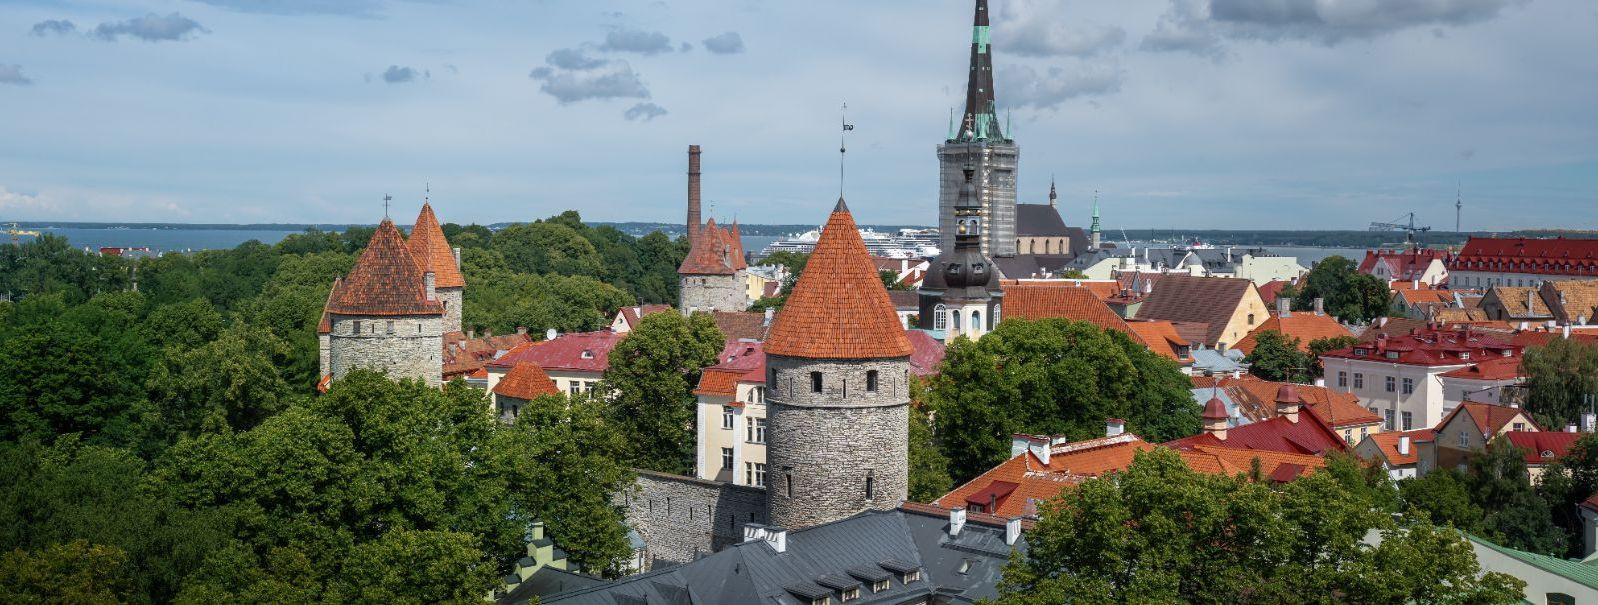 Estonia has emerged as a global leader in digital innovation, making it an attractive destination for entrepreneurs and businesses worldwide. With its robust di